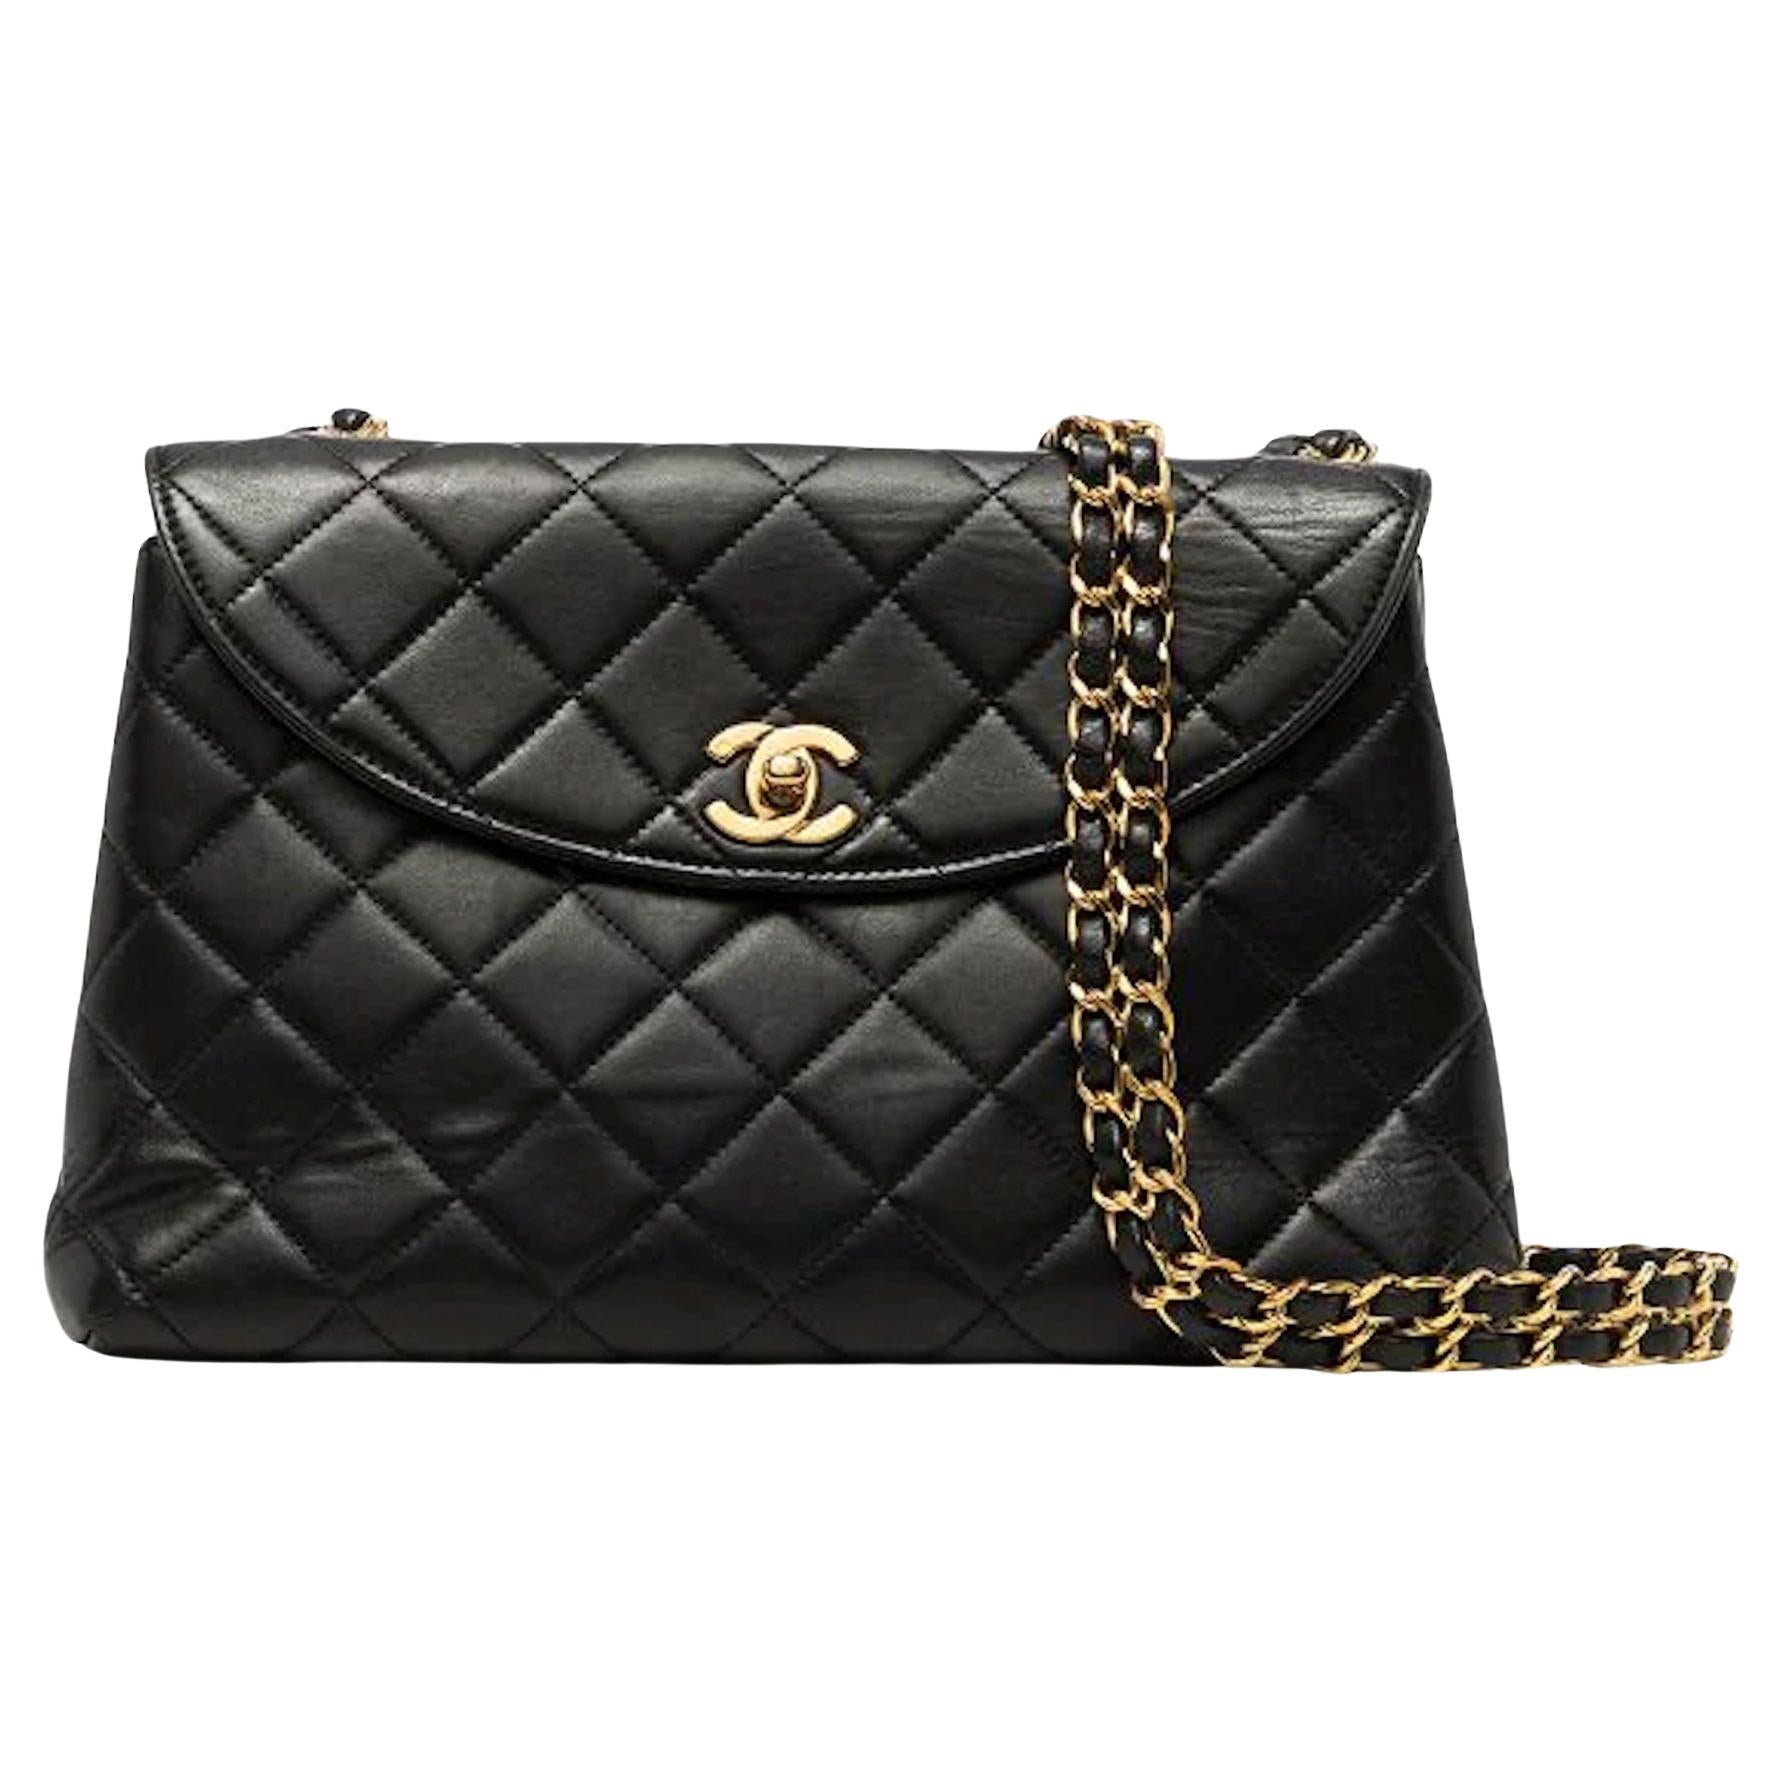 chanel bag with gold hardware